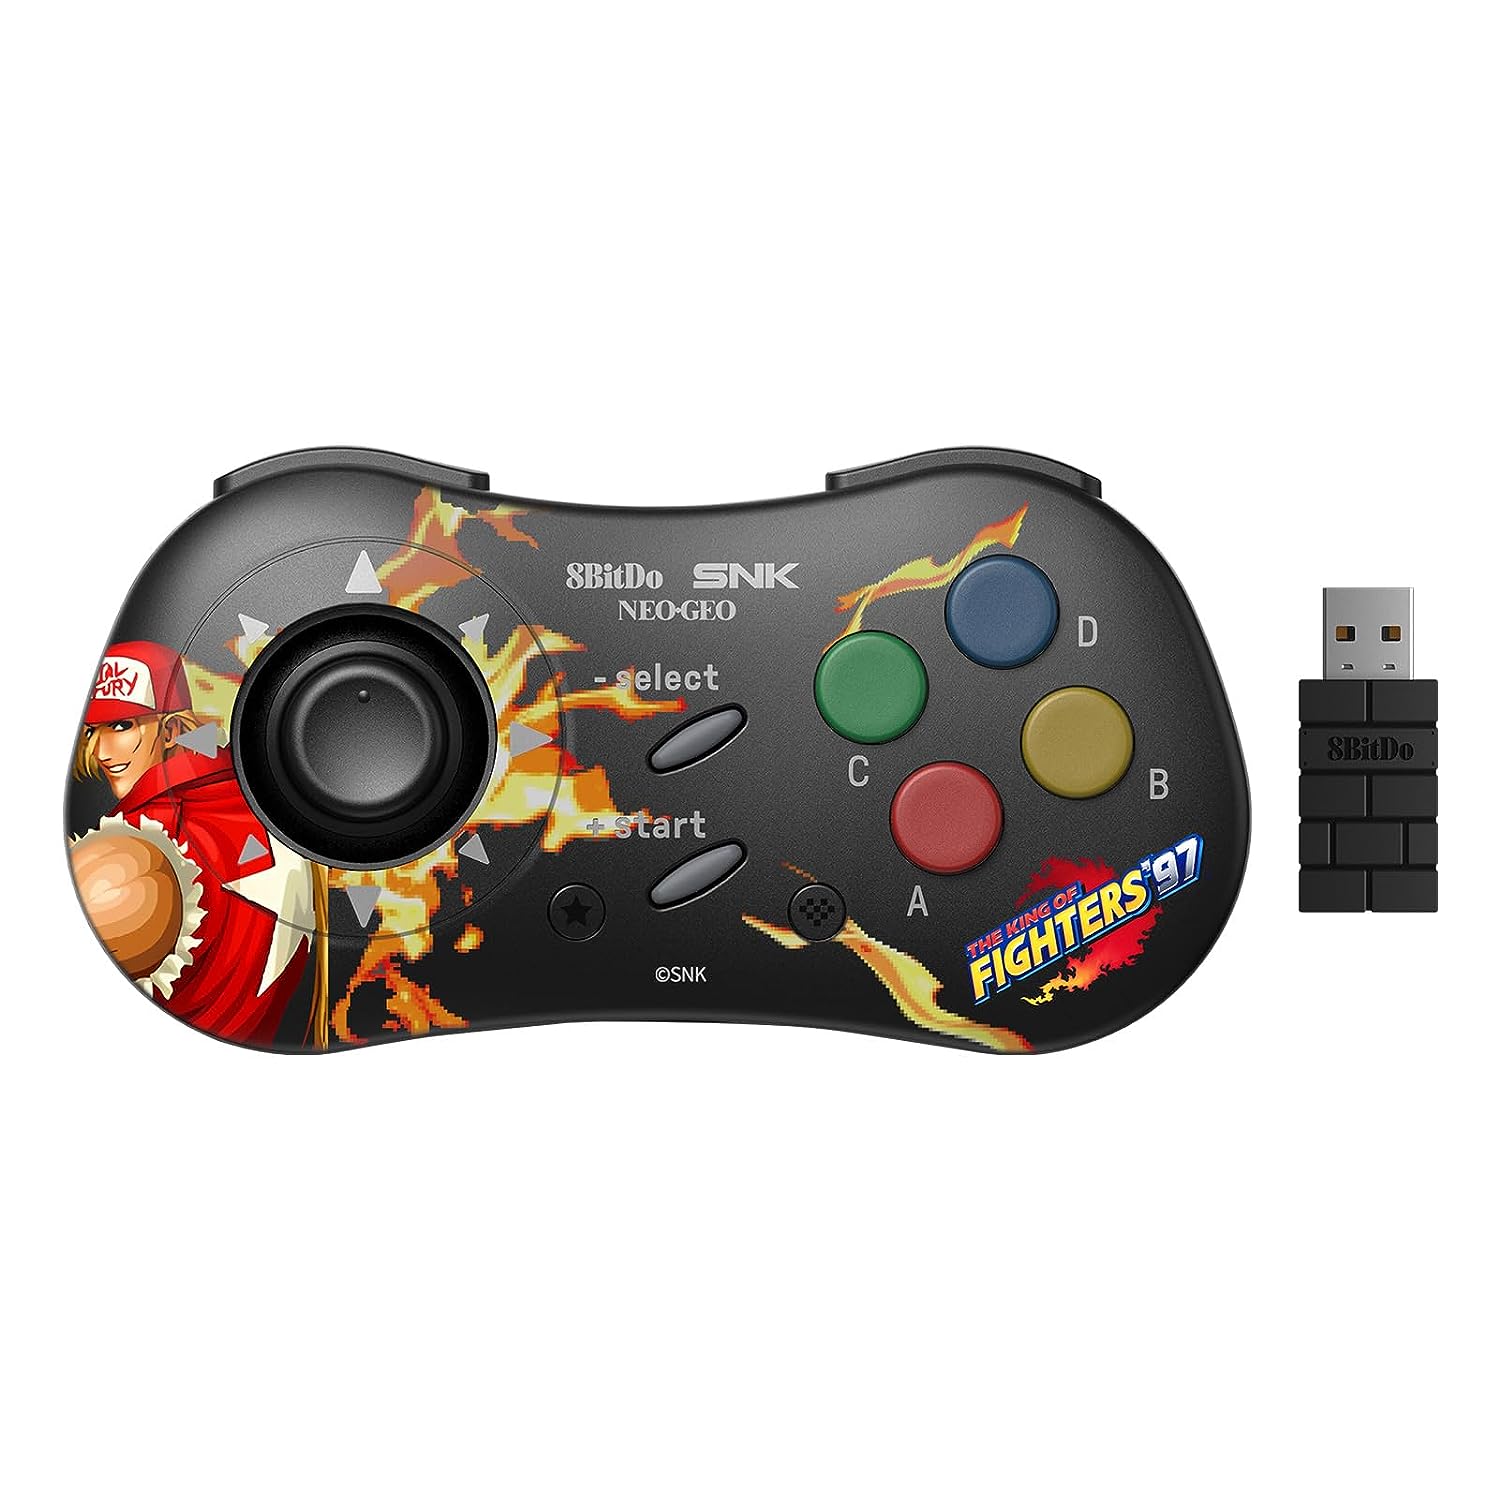 8BitDo NEOGEO Wireless controller - Official SNK license - Terry Bogard limited edition Gamesellers.nl